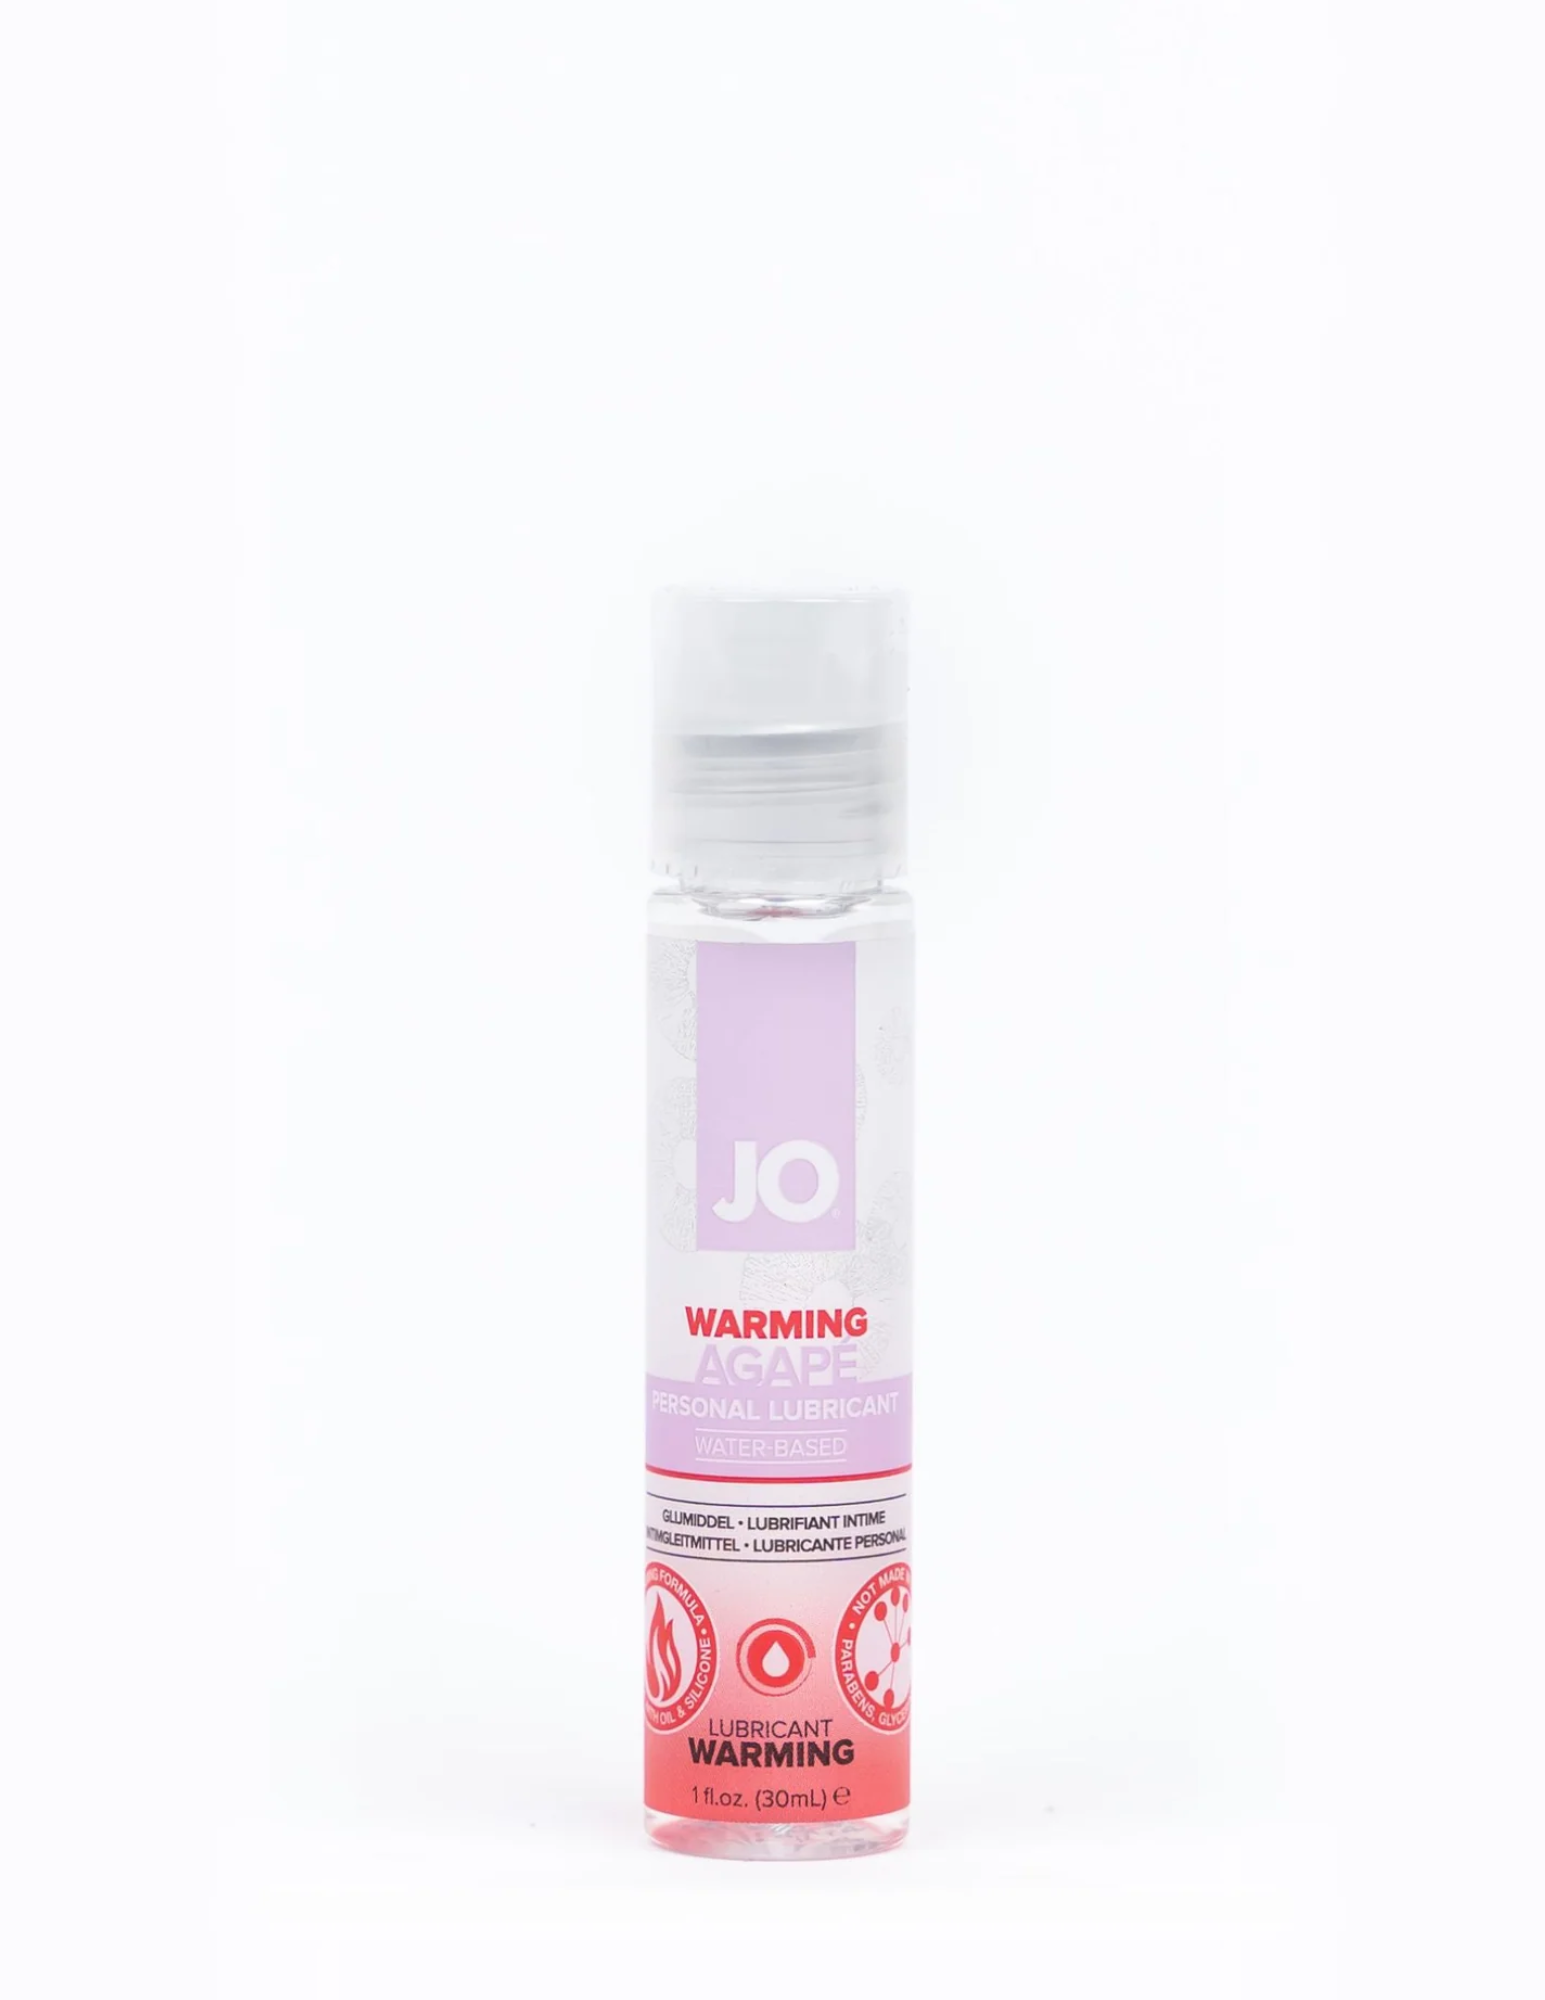 Photo of the front of the System Jo Agape Warming Water Based Lubricant bottle.